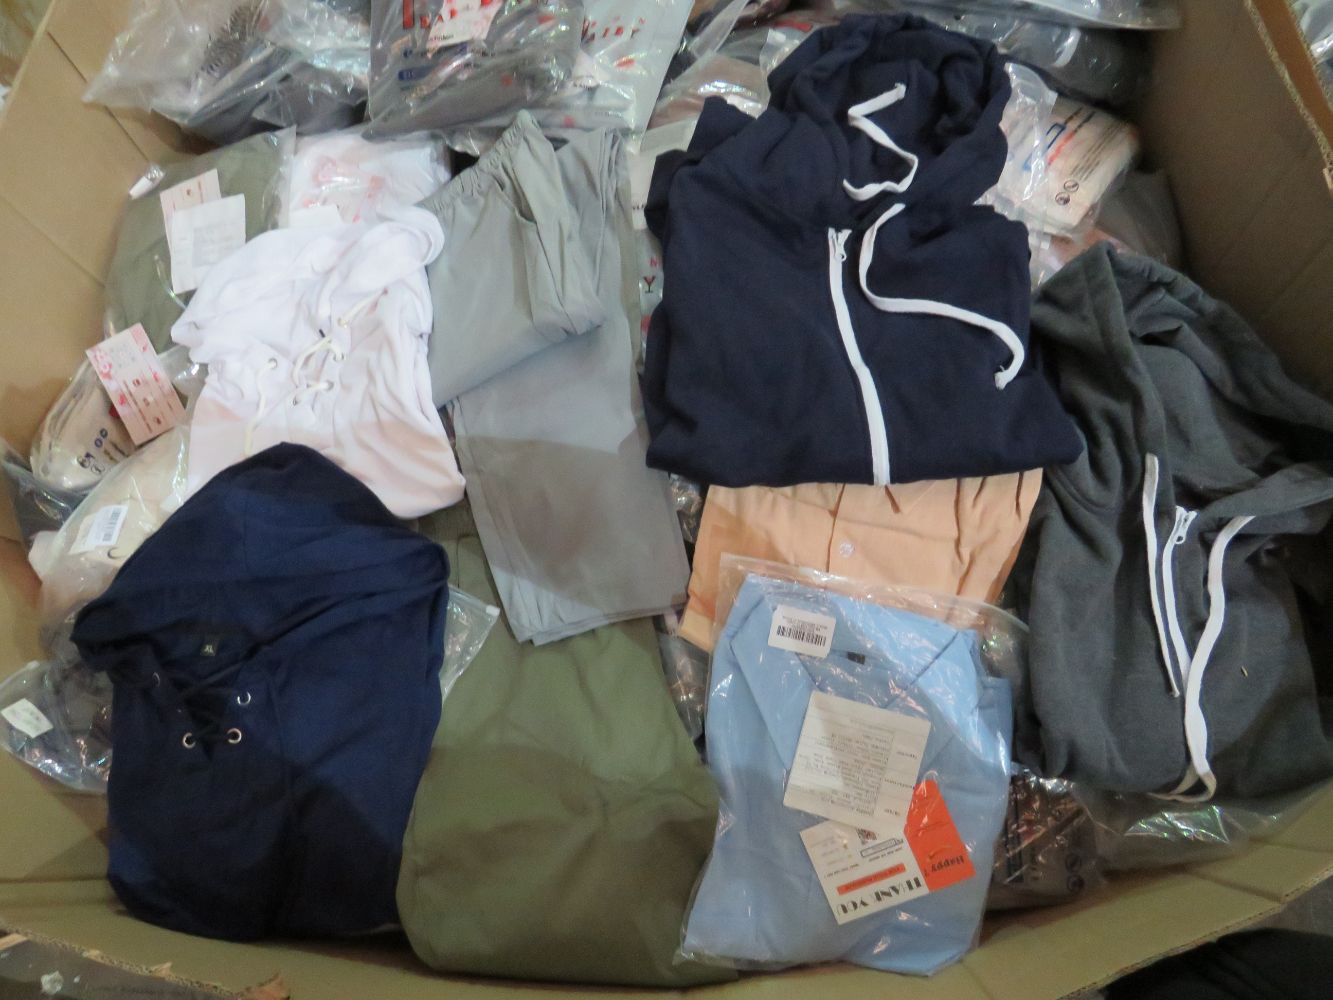 Pallets and boxes of Brand new Amazon clothing and shoes with low start prices